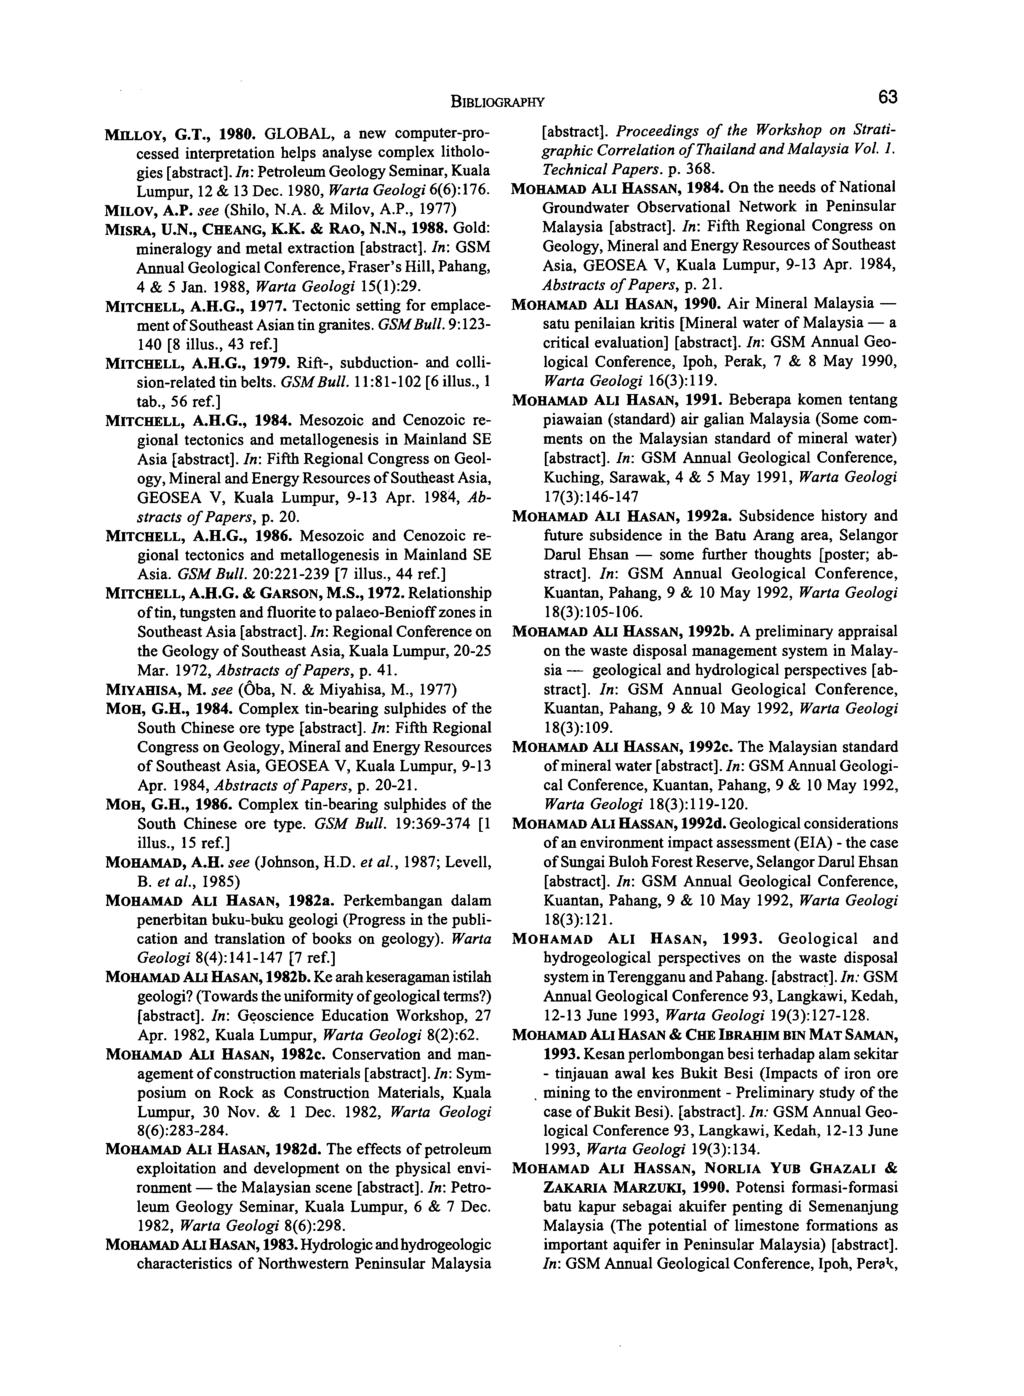 MILLOY, G.T., 1980. GLOBAL, a new computer-processed interpretation helps analyse complex lithologies [abstract]. In: Petroleum Geology Seminar, Kuala Lumpur, 12 & 13 Dec.